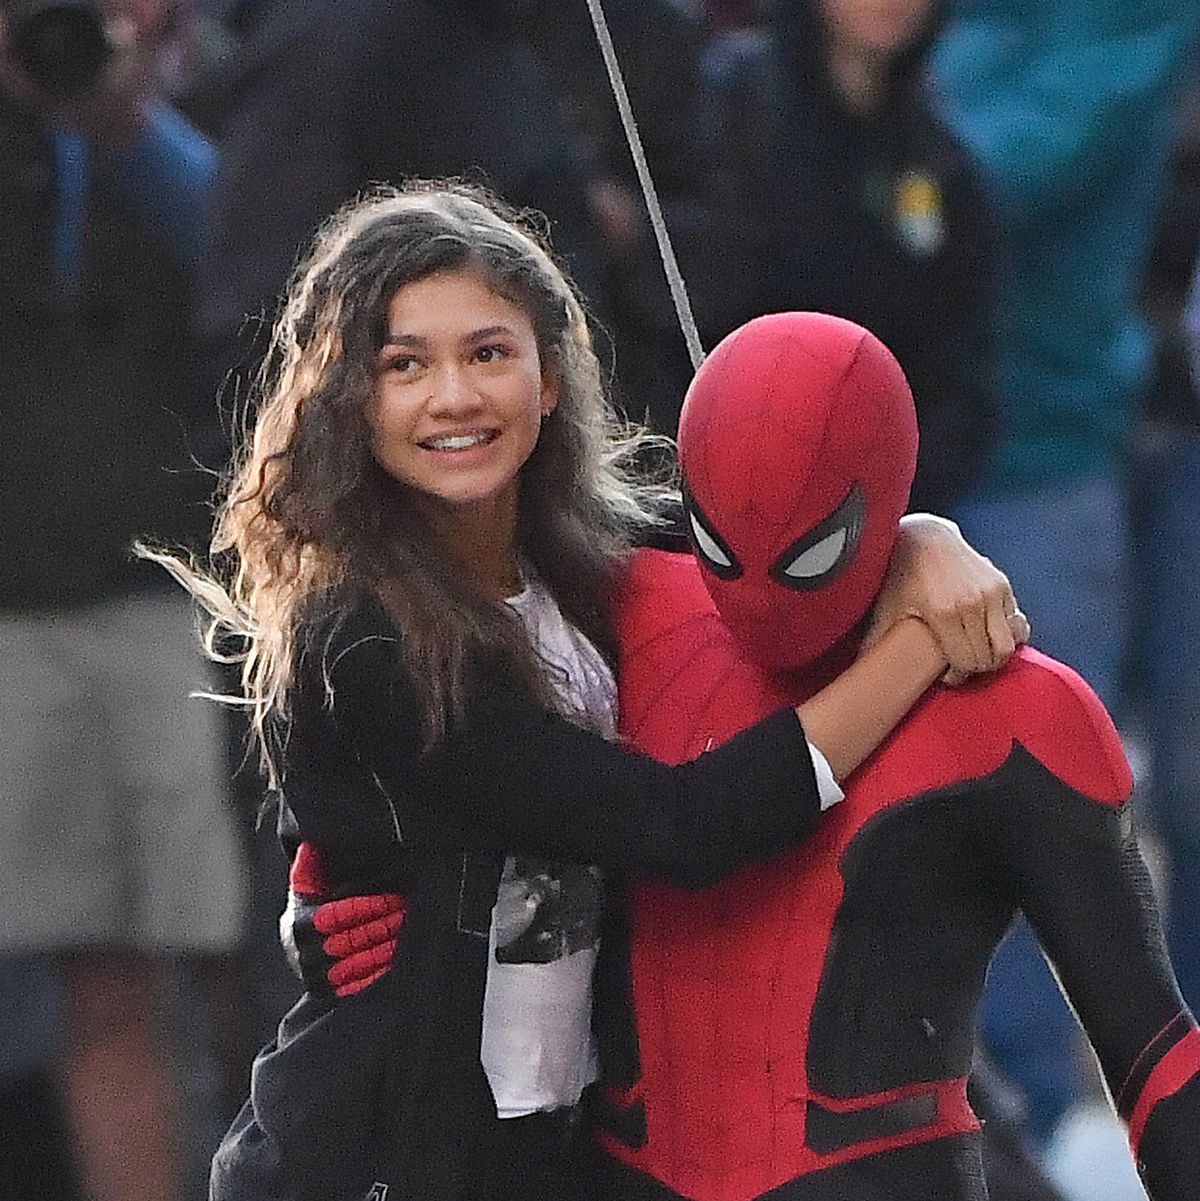 Spider-Man: Far From Home: Everything We Know About the Movie